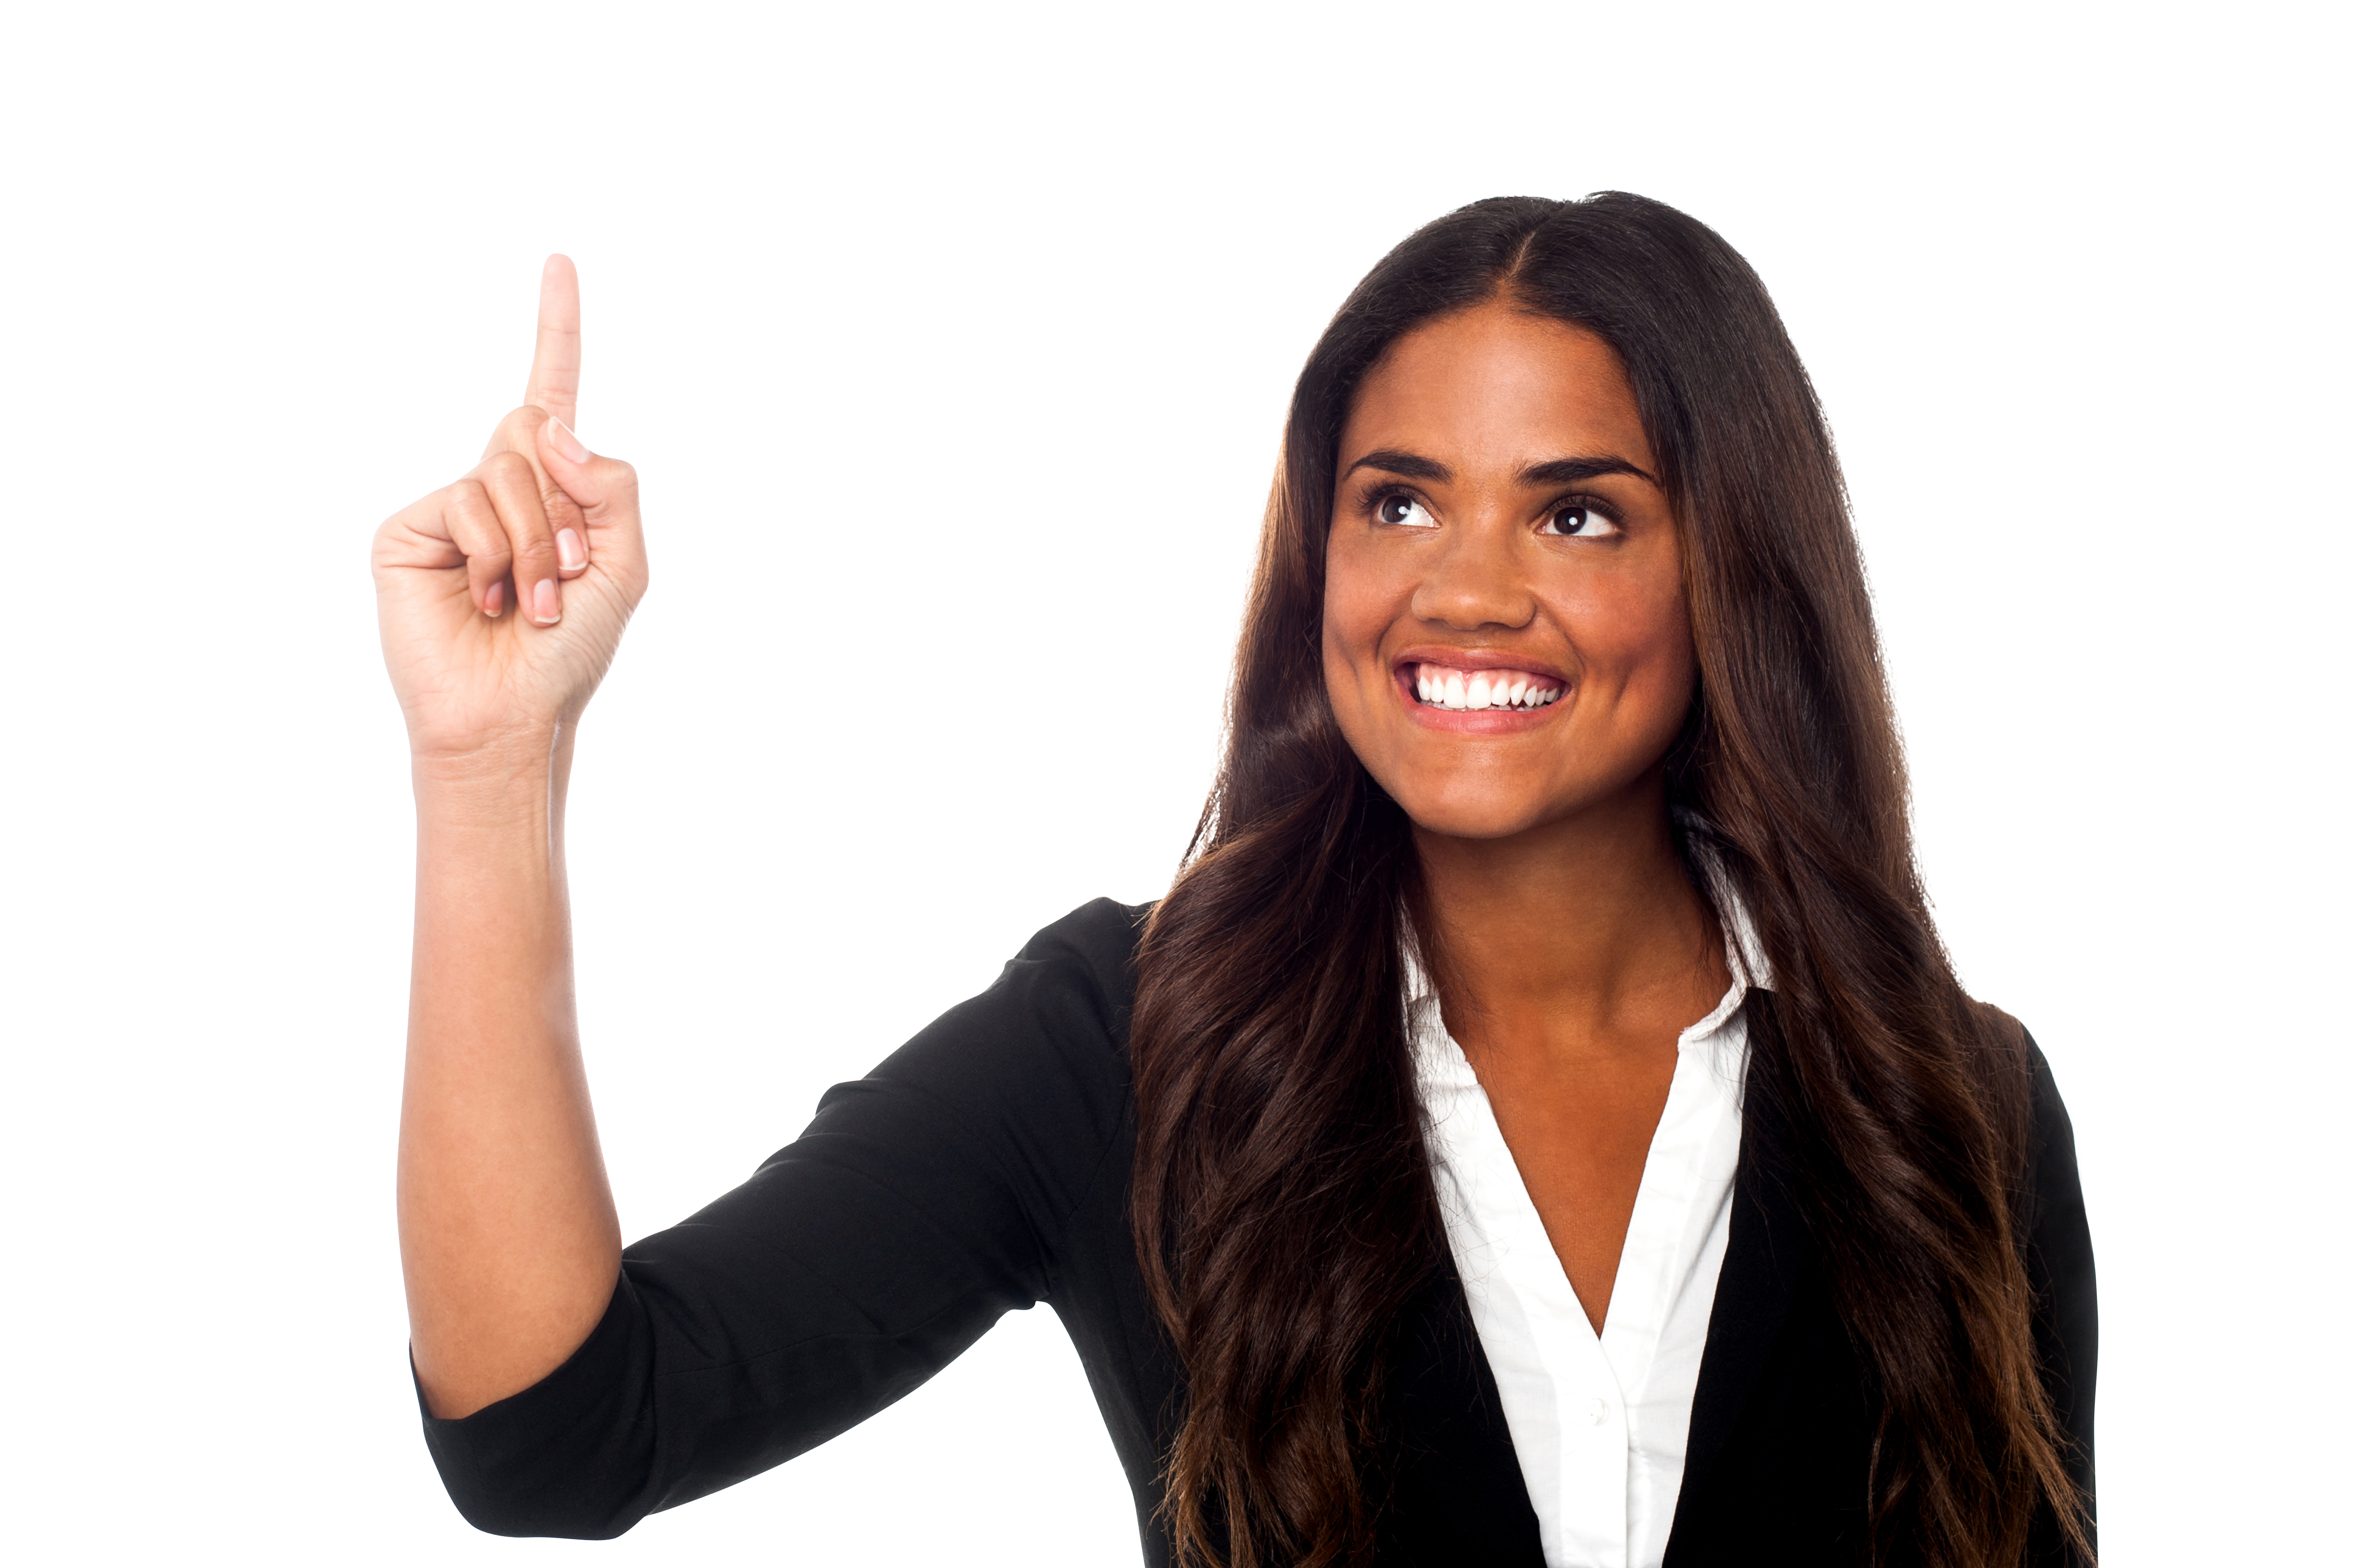 Women / Girl PNG Image - PurePNG  Free transparent CC0 PNG Image Library